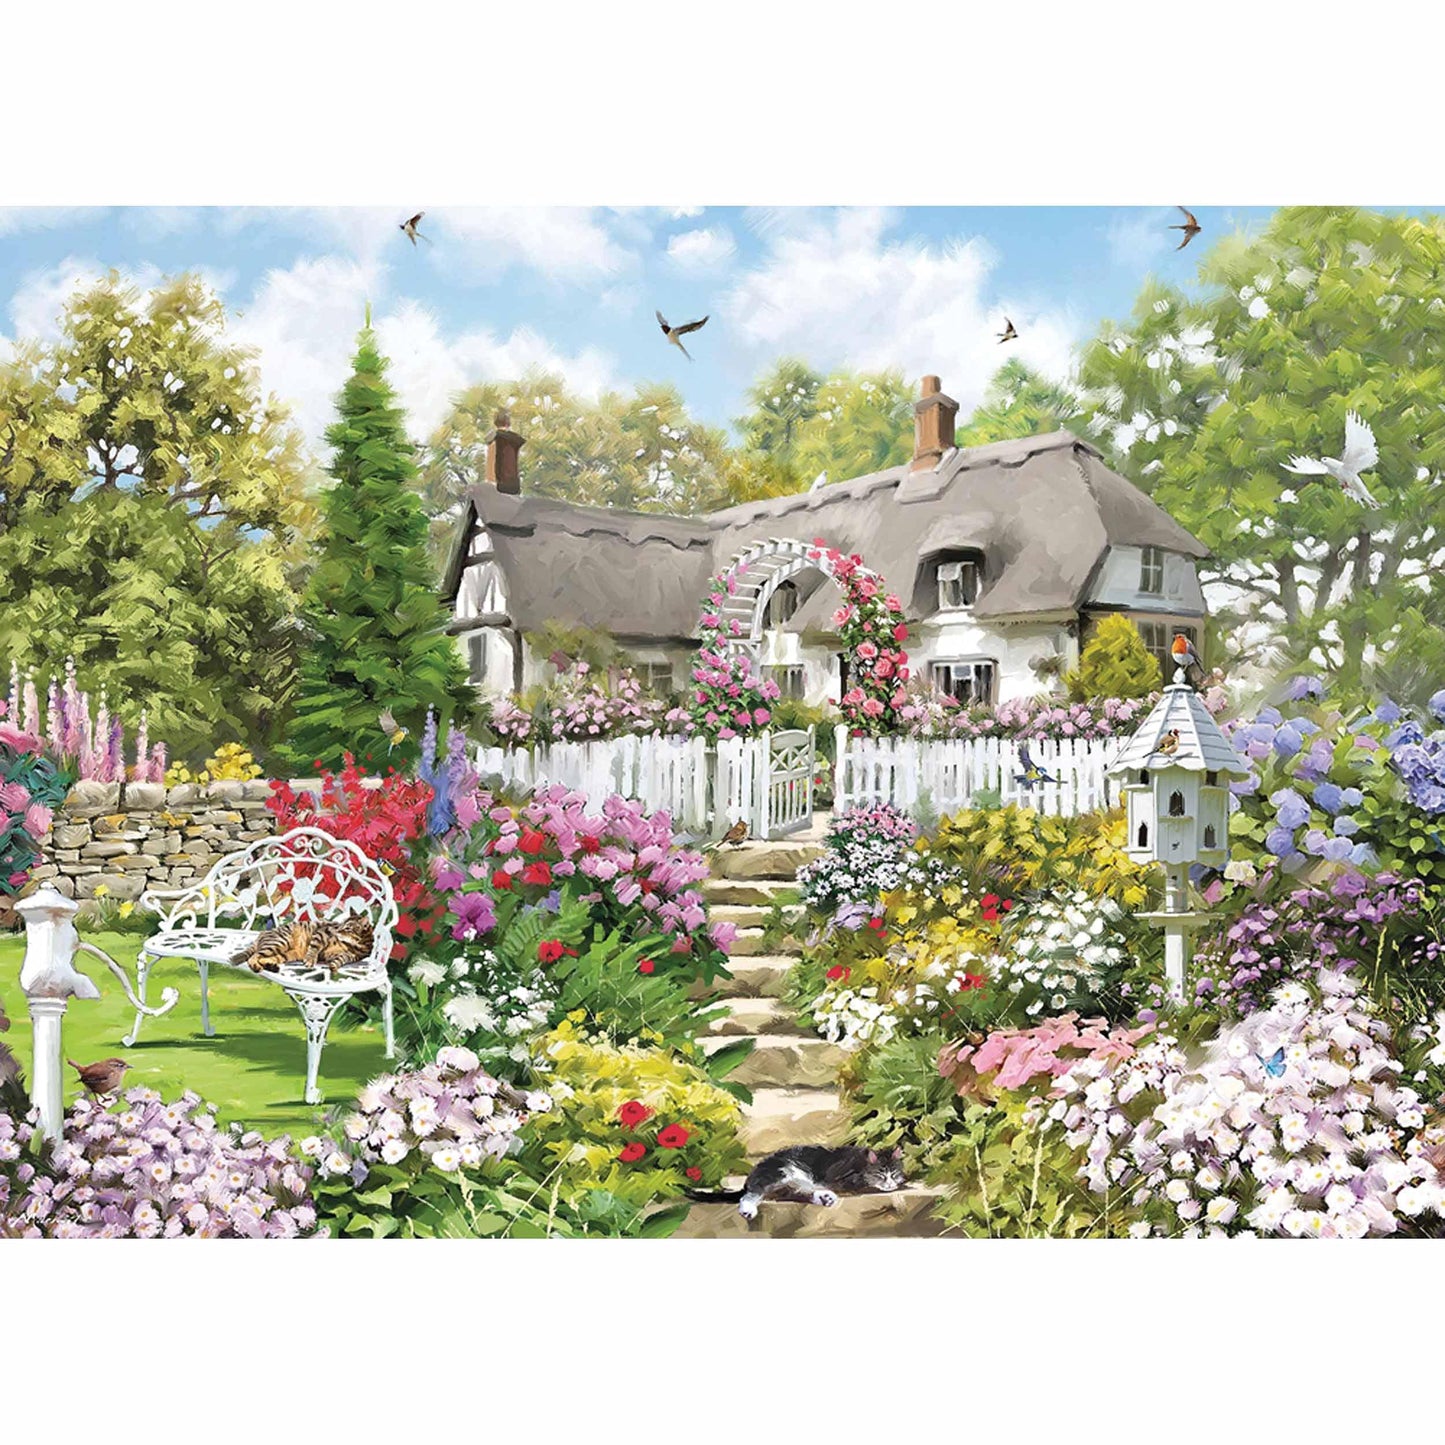 Otter House - Country Cottage - 1000 Piece Jigsaw Puzzle